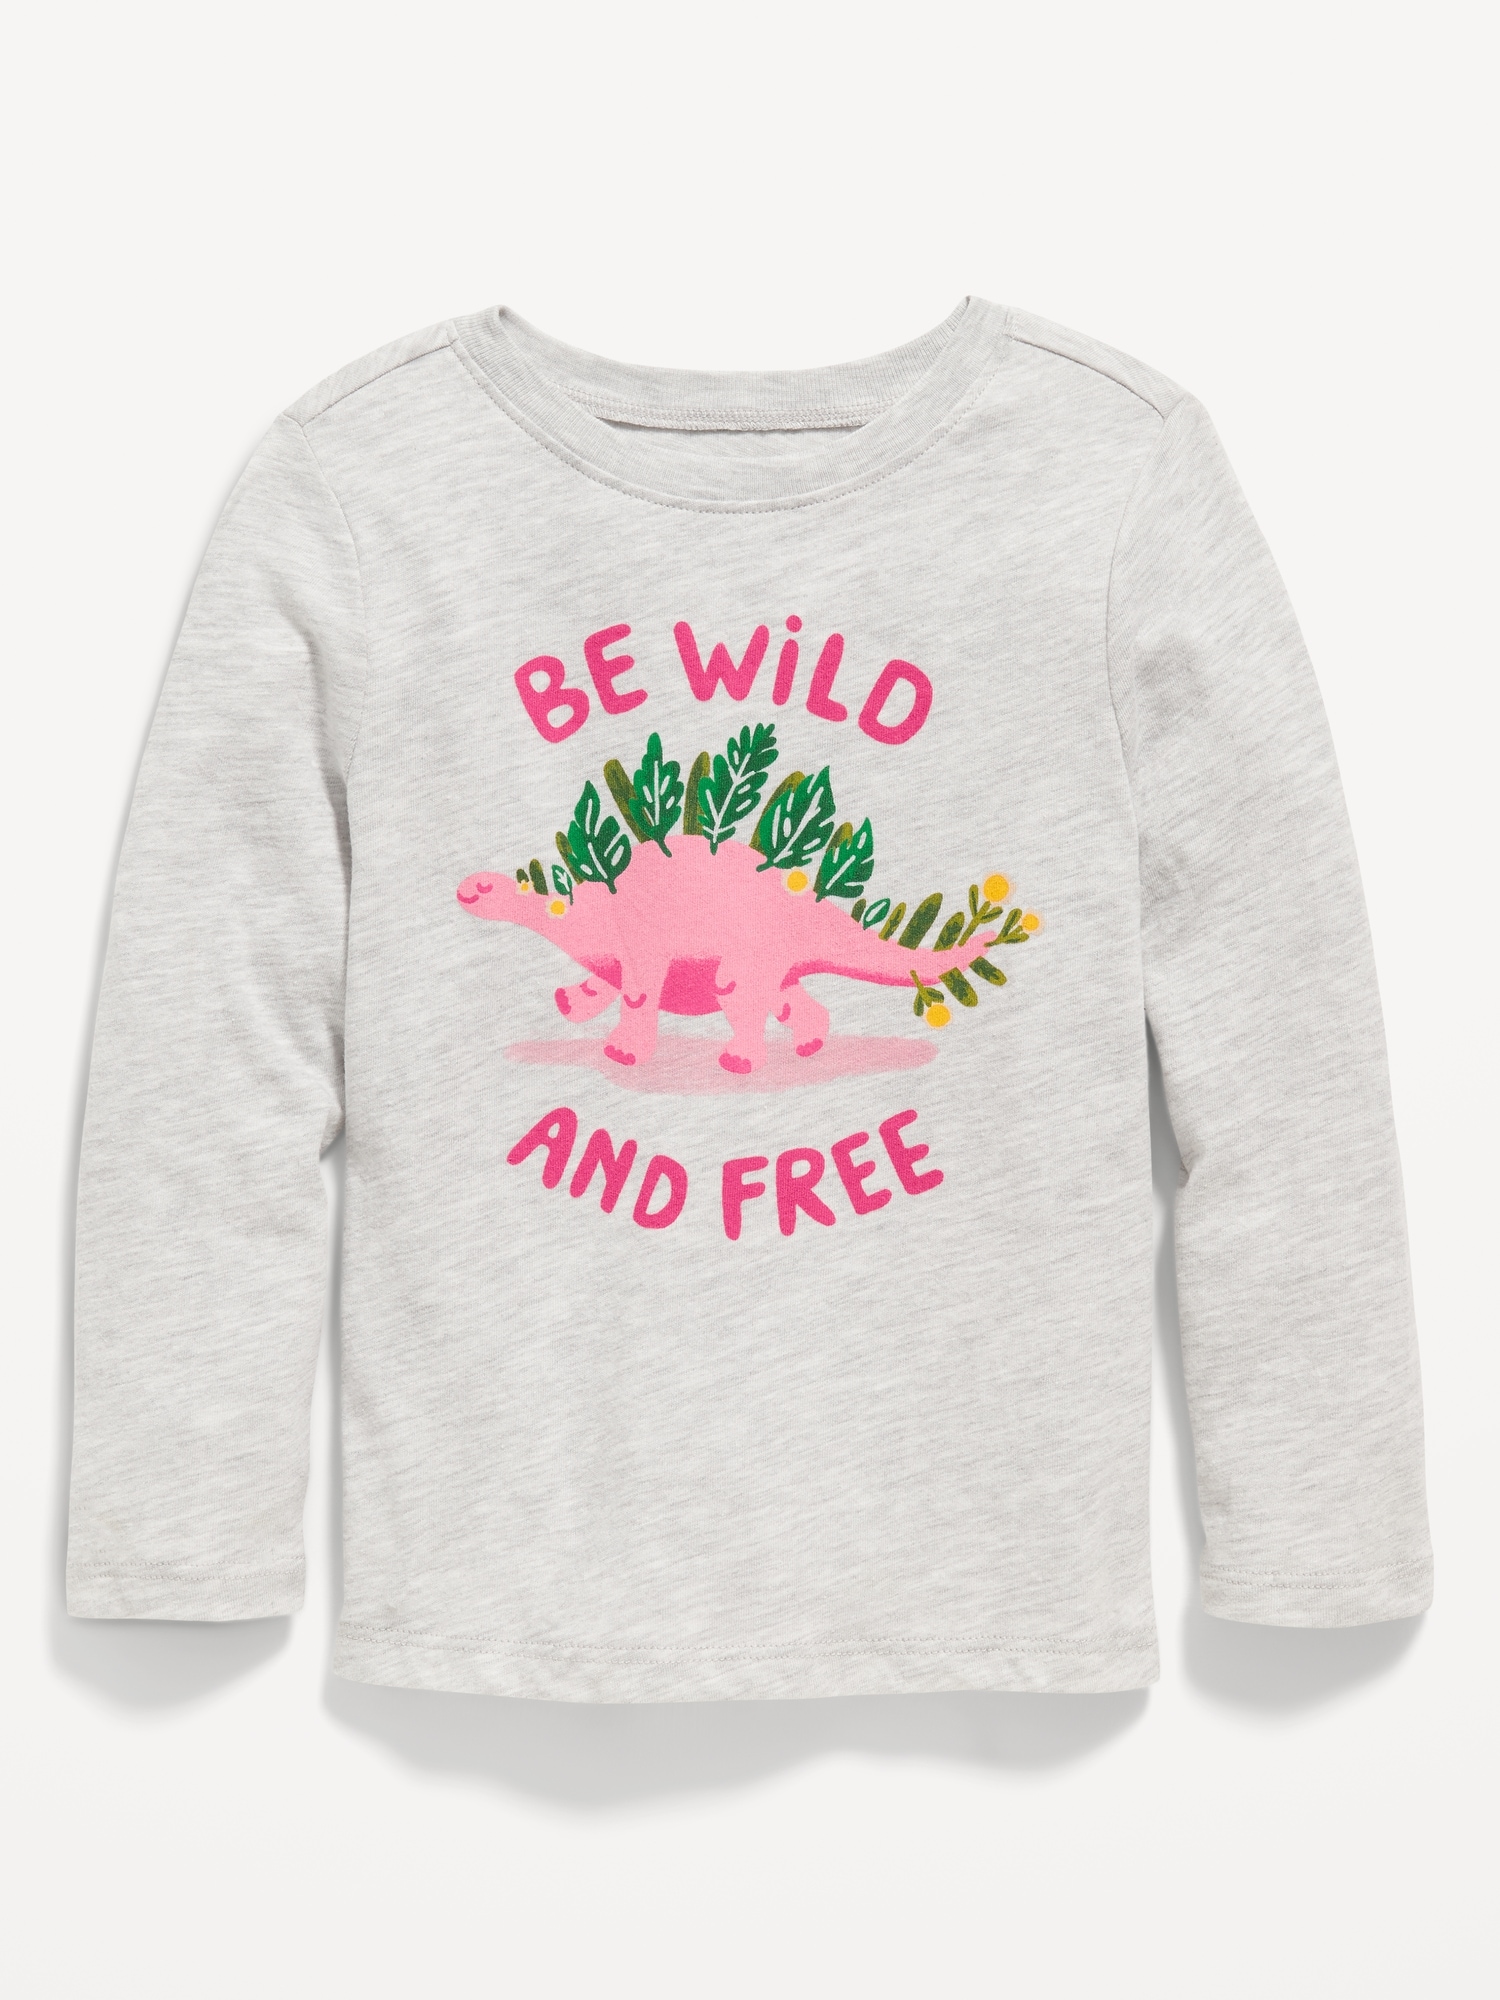 Unisex Long-Sleeve Graphic T-Shirt for Toddler | Old Navy